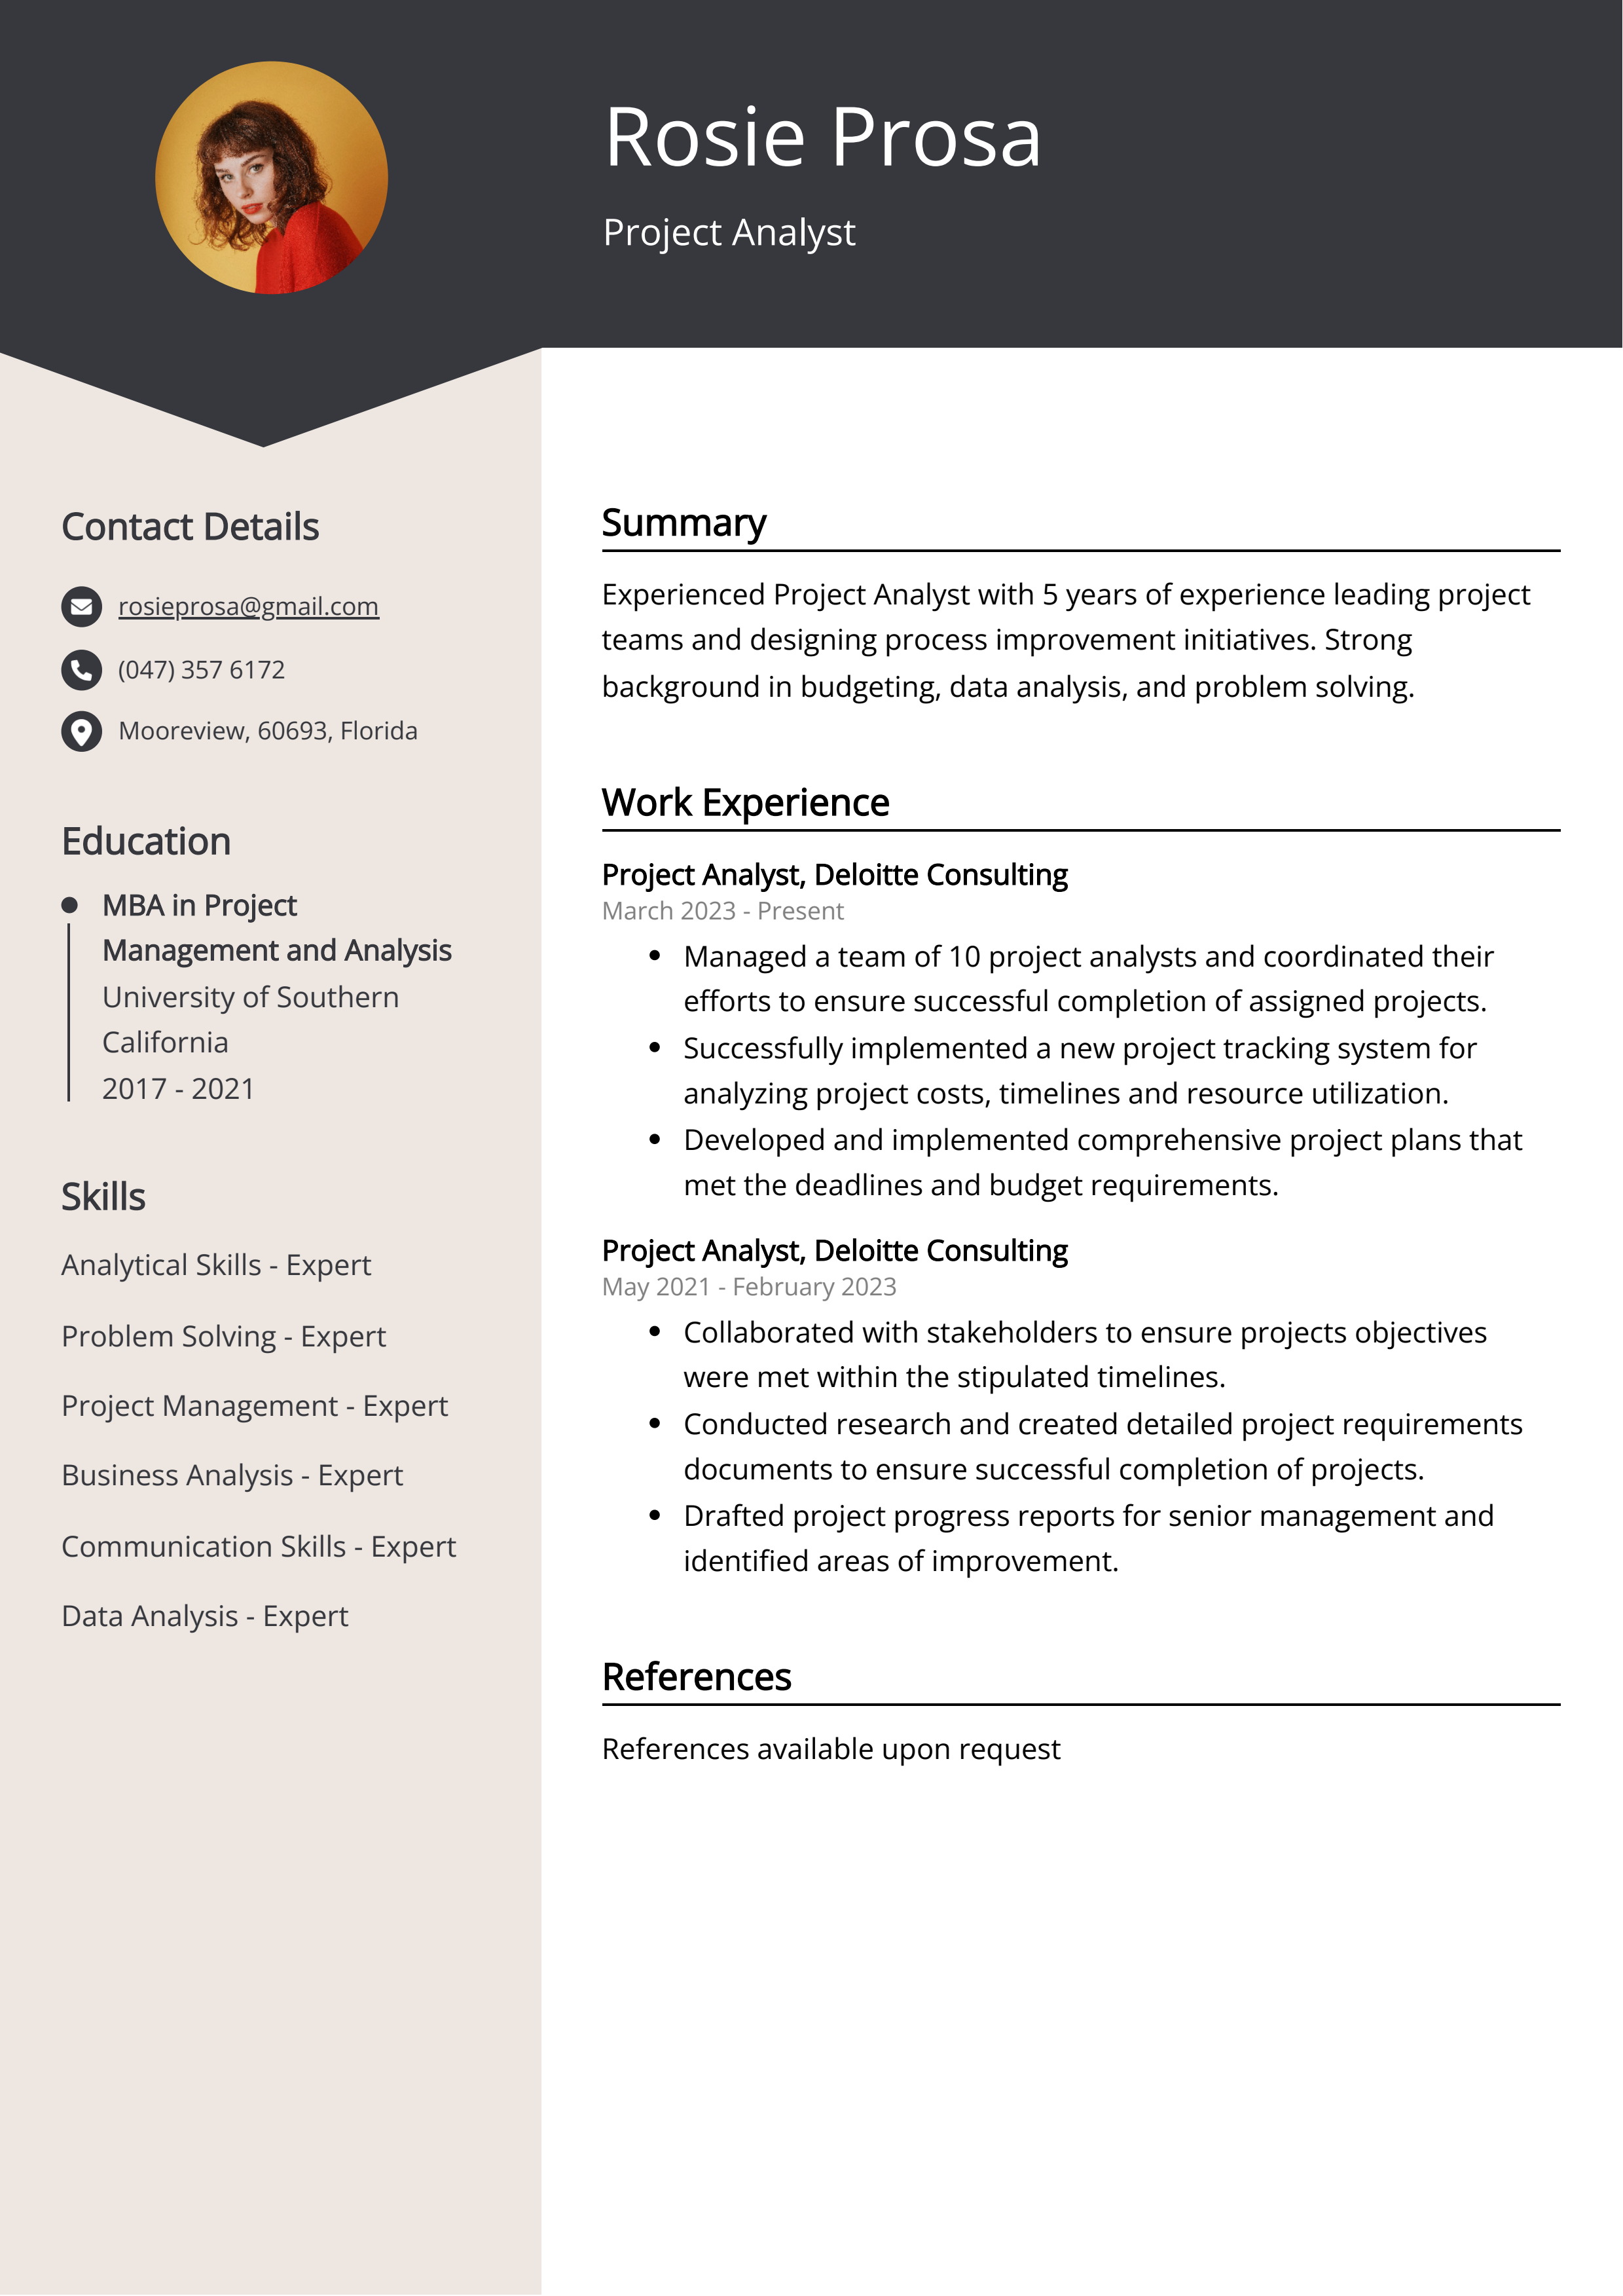 Project Analyst CV Example